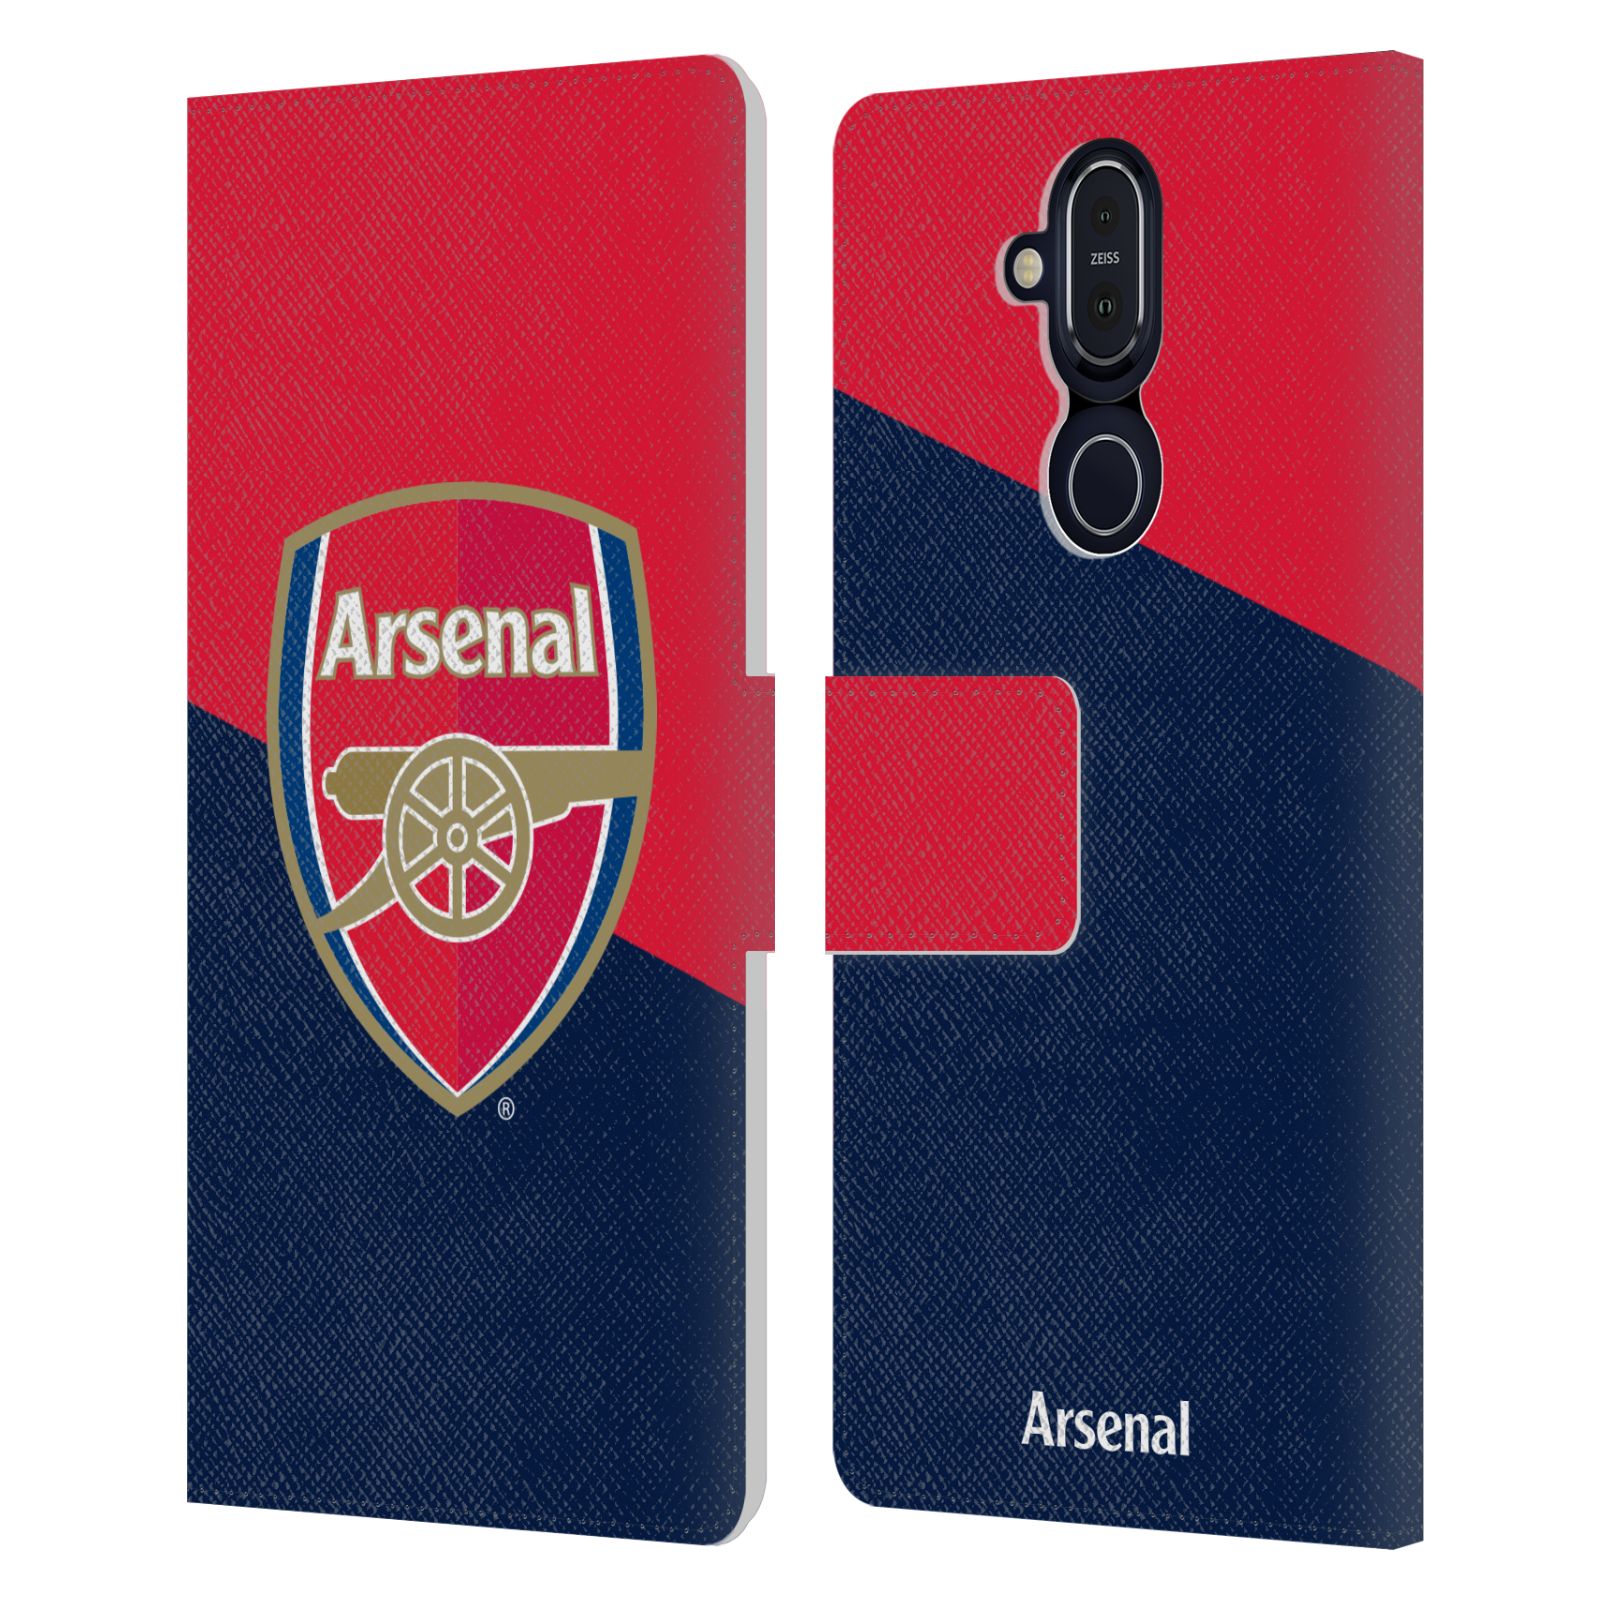 Arsenal FC Crest Embroidered Leather Wallet 2 